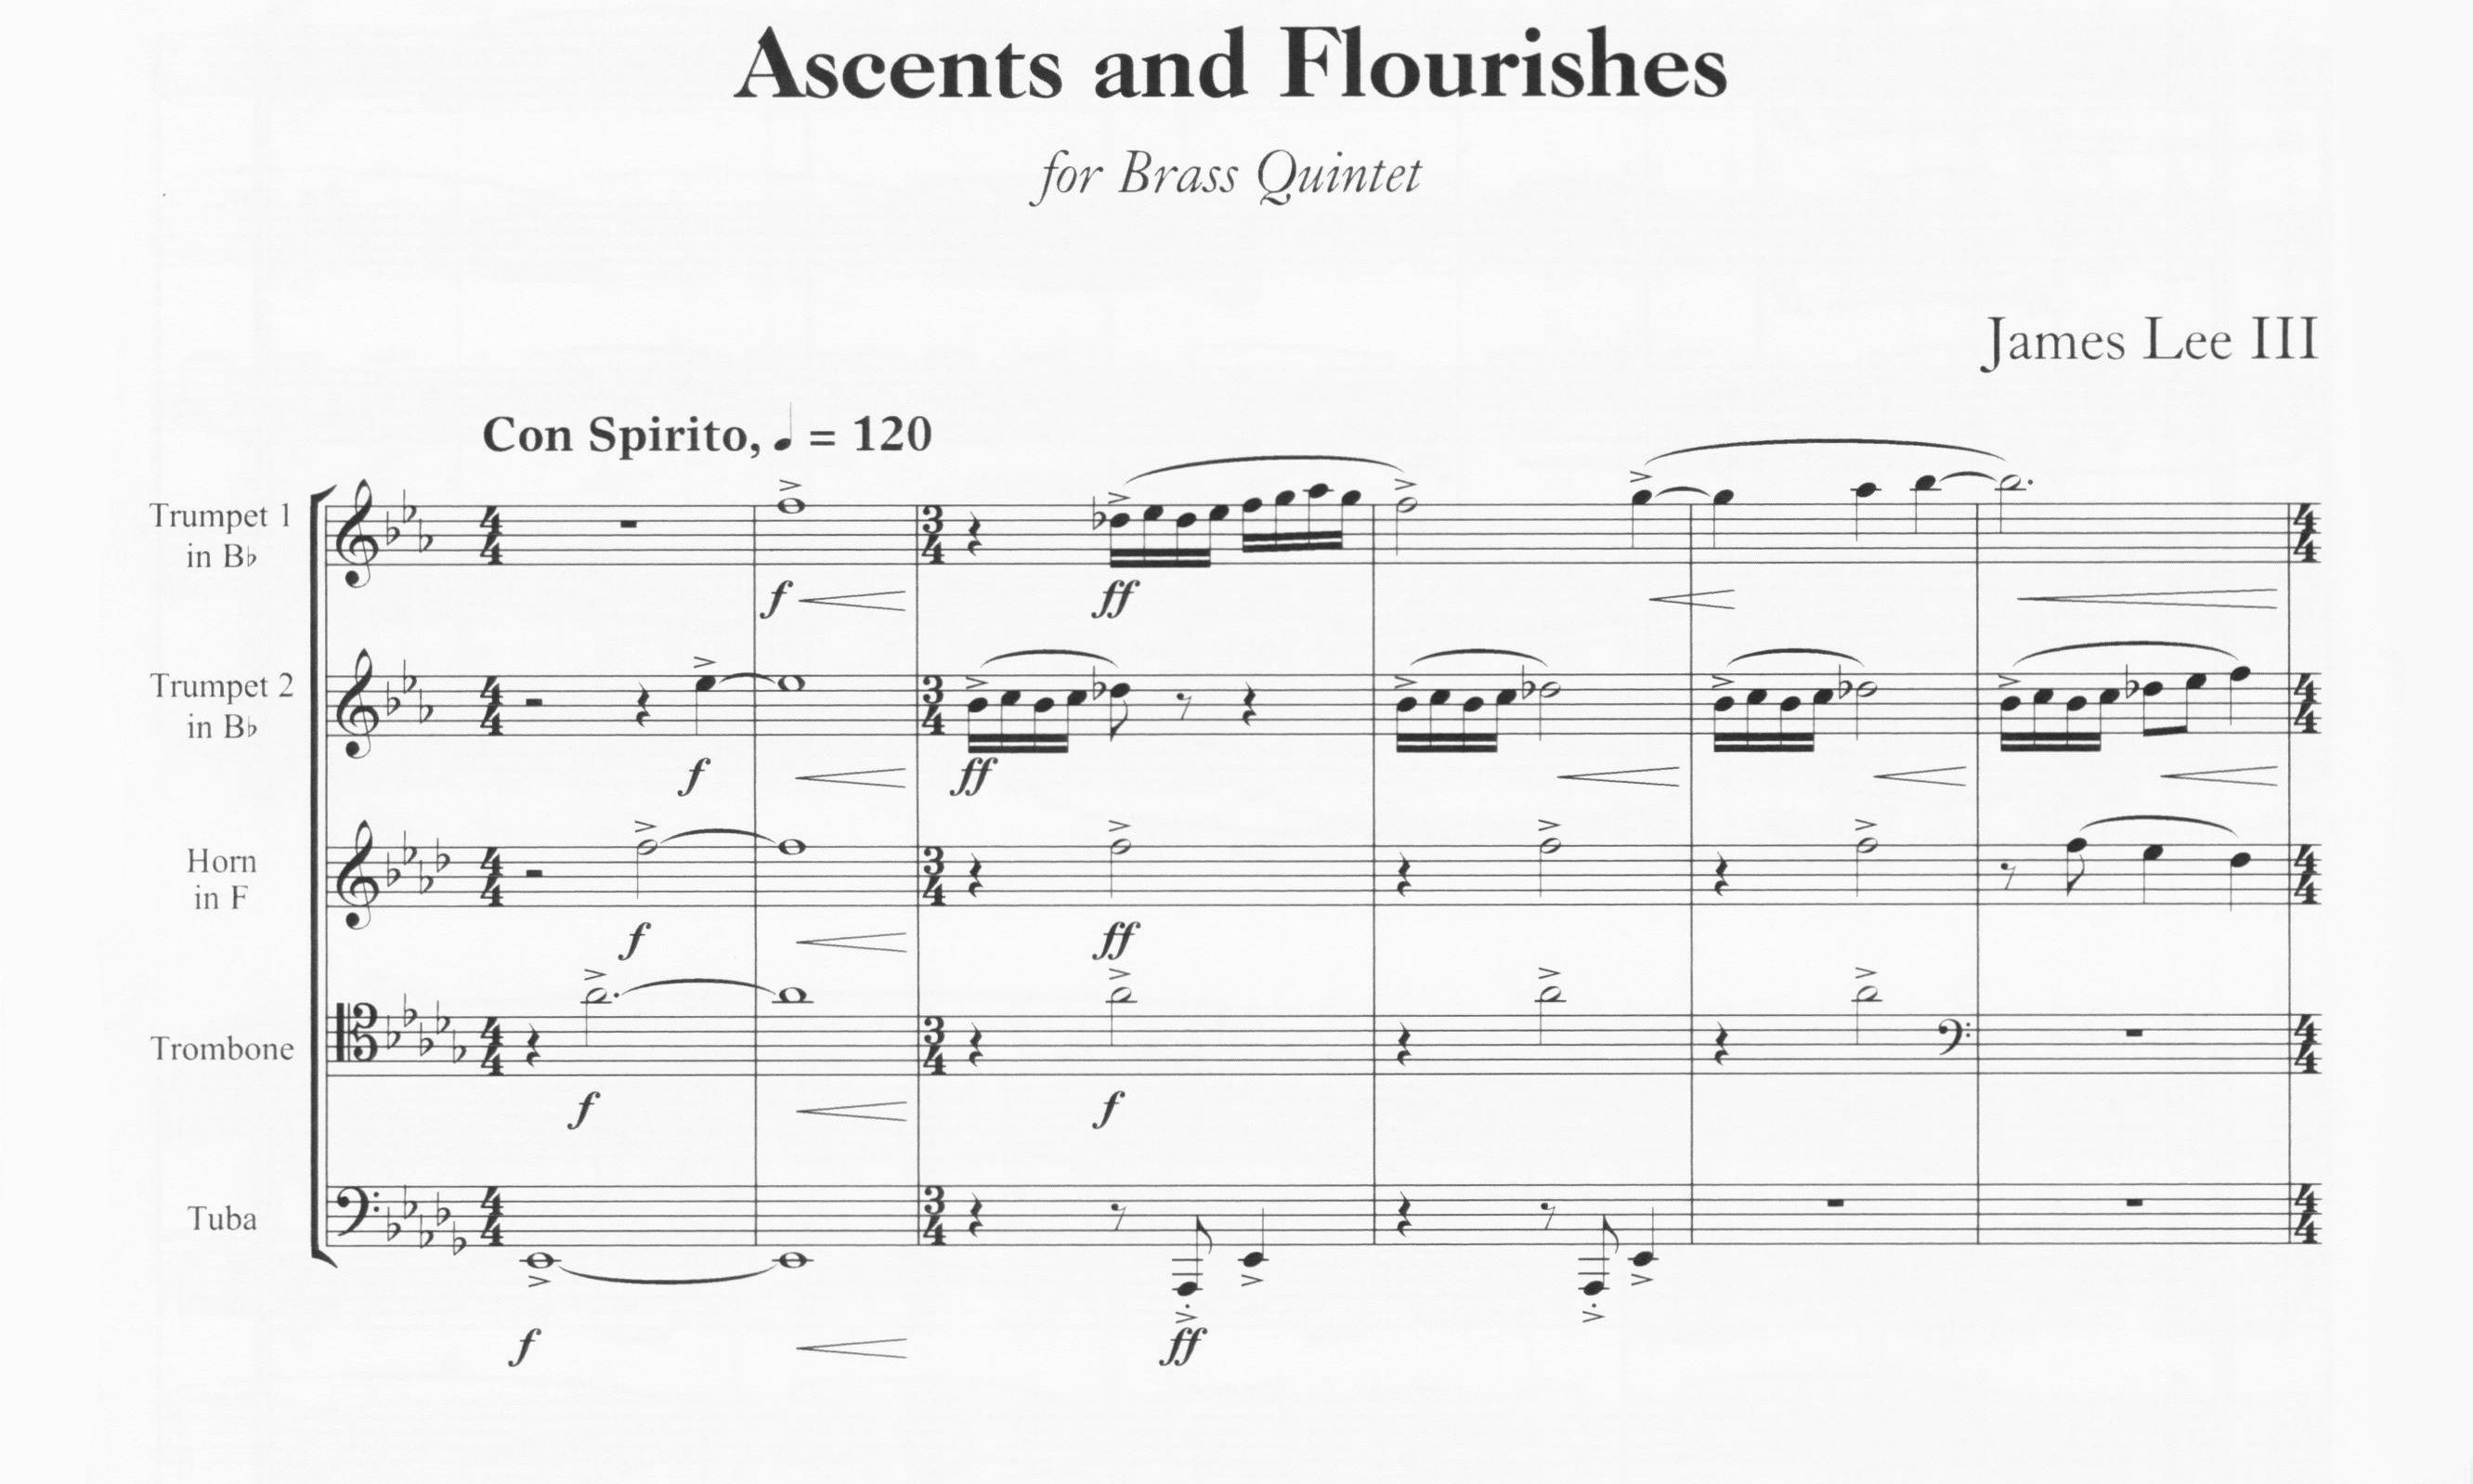 Lee, James - Ascents and Flourishes